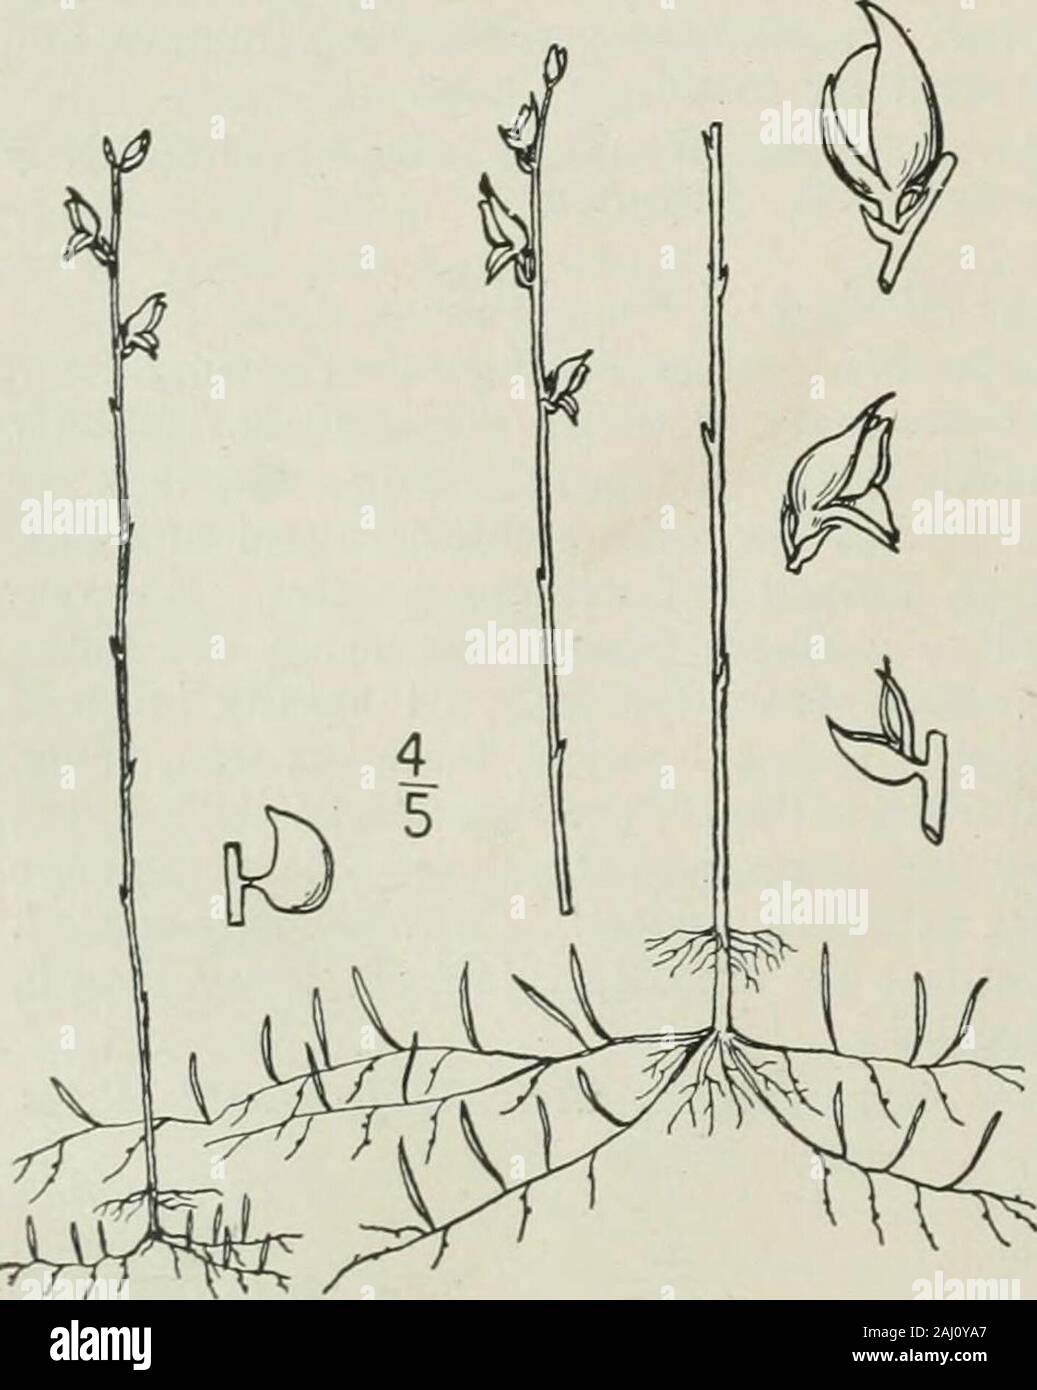 An illustrated flora of the northern United States, Canada and the British possessions : from Newfoundland to the parallel of the southern boundary of Virginia and from the Atlantic Ocean westward to the 102nd meridian . of ponds, or in bogs, Newfoundlandto Minnesota, south to Florida and Texas. Also in theBahamas and Cuba. July-Aug. 2. Stomoisia juncea (Vahl.) Barnhart.Rush Bladderwort. Fig. 3874. Utricularia juncea Vahl, Enum. i: 202. 1804.Utricularia personata LeConte; Ell. Bot. S. C. & Ga. I : 23. 1816. Scape strict, brownish, 4-16 high, i-12-flow-ered, the flowers usually scattered along Stock Photo